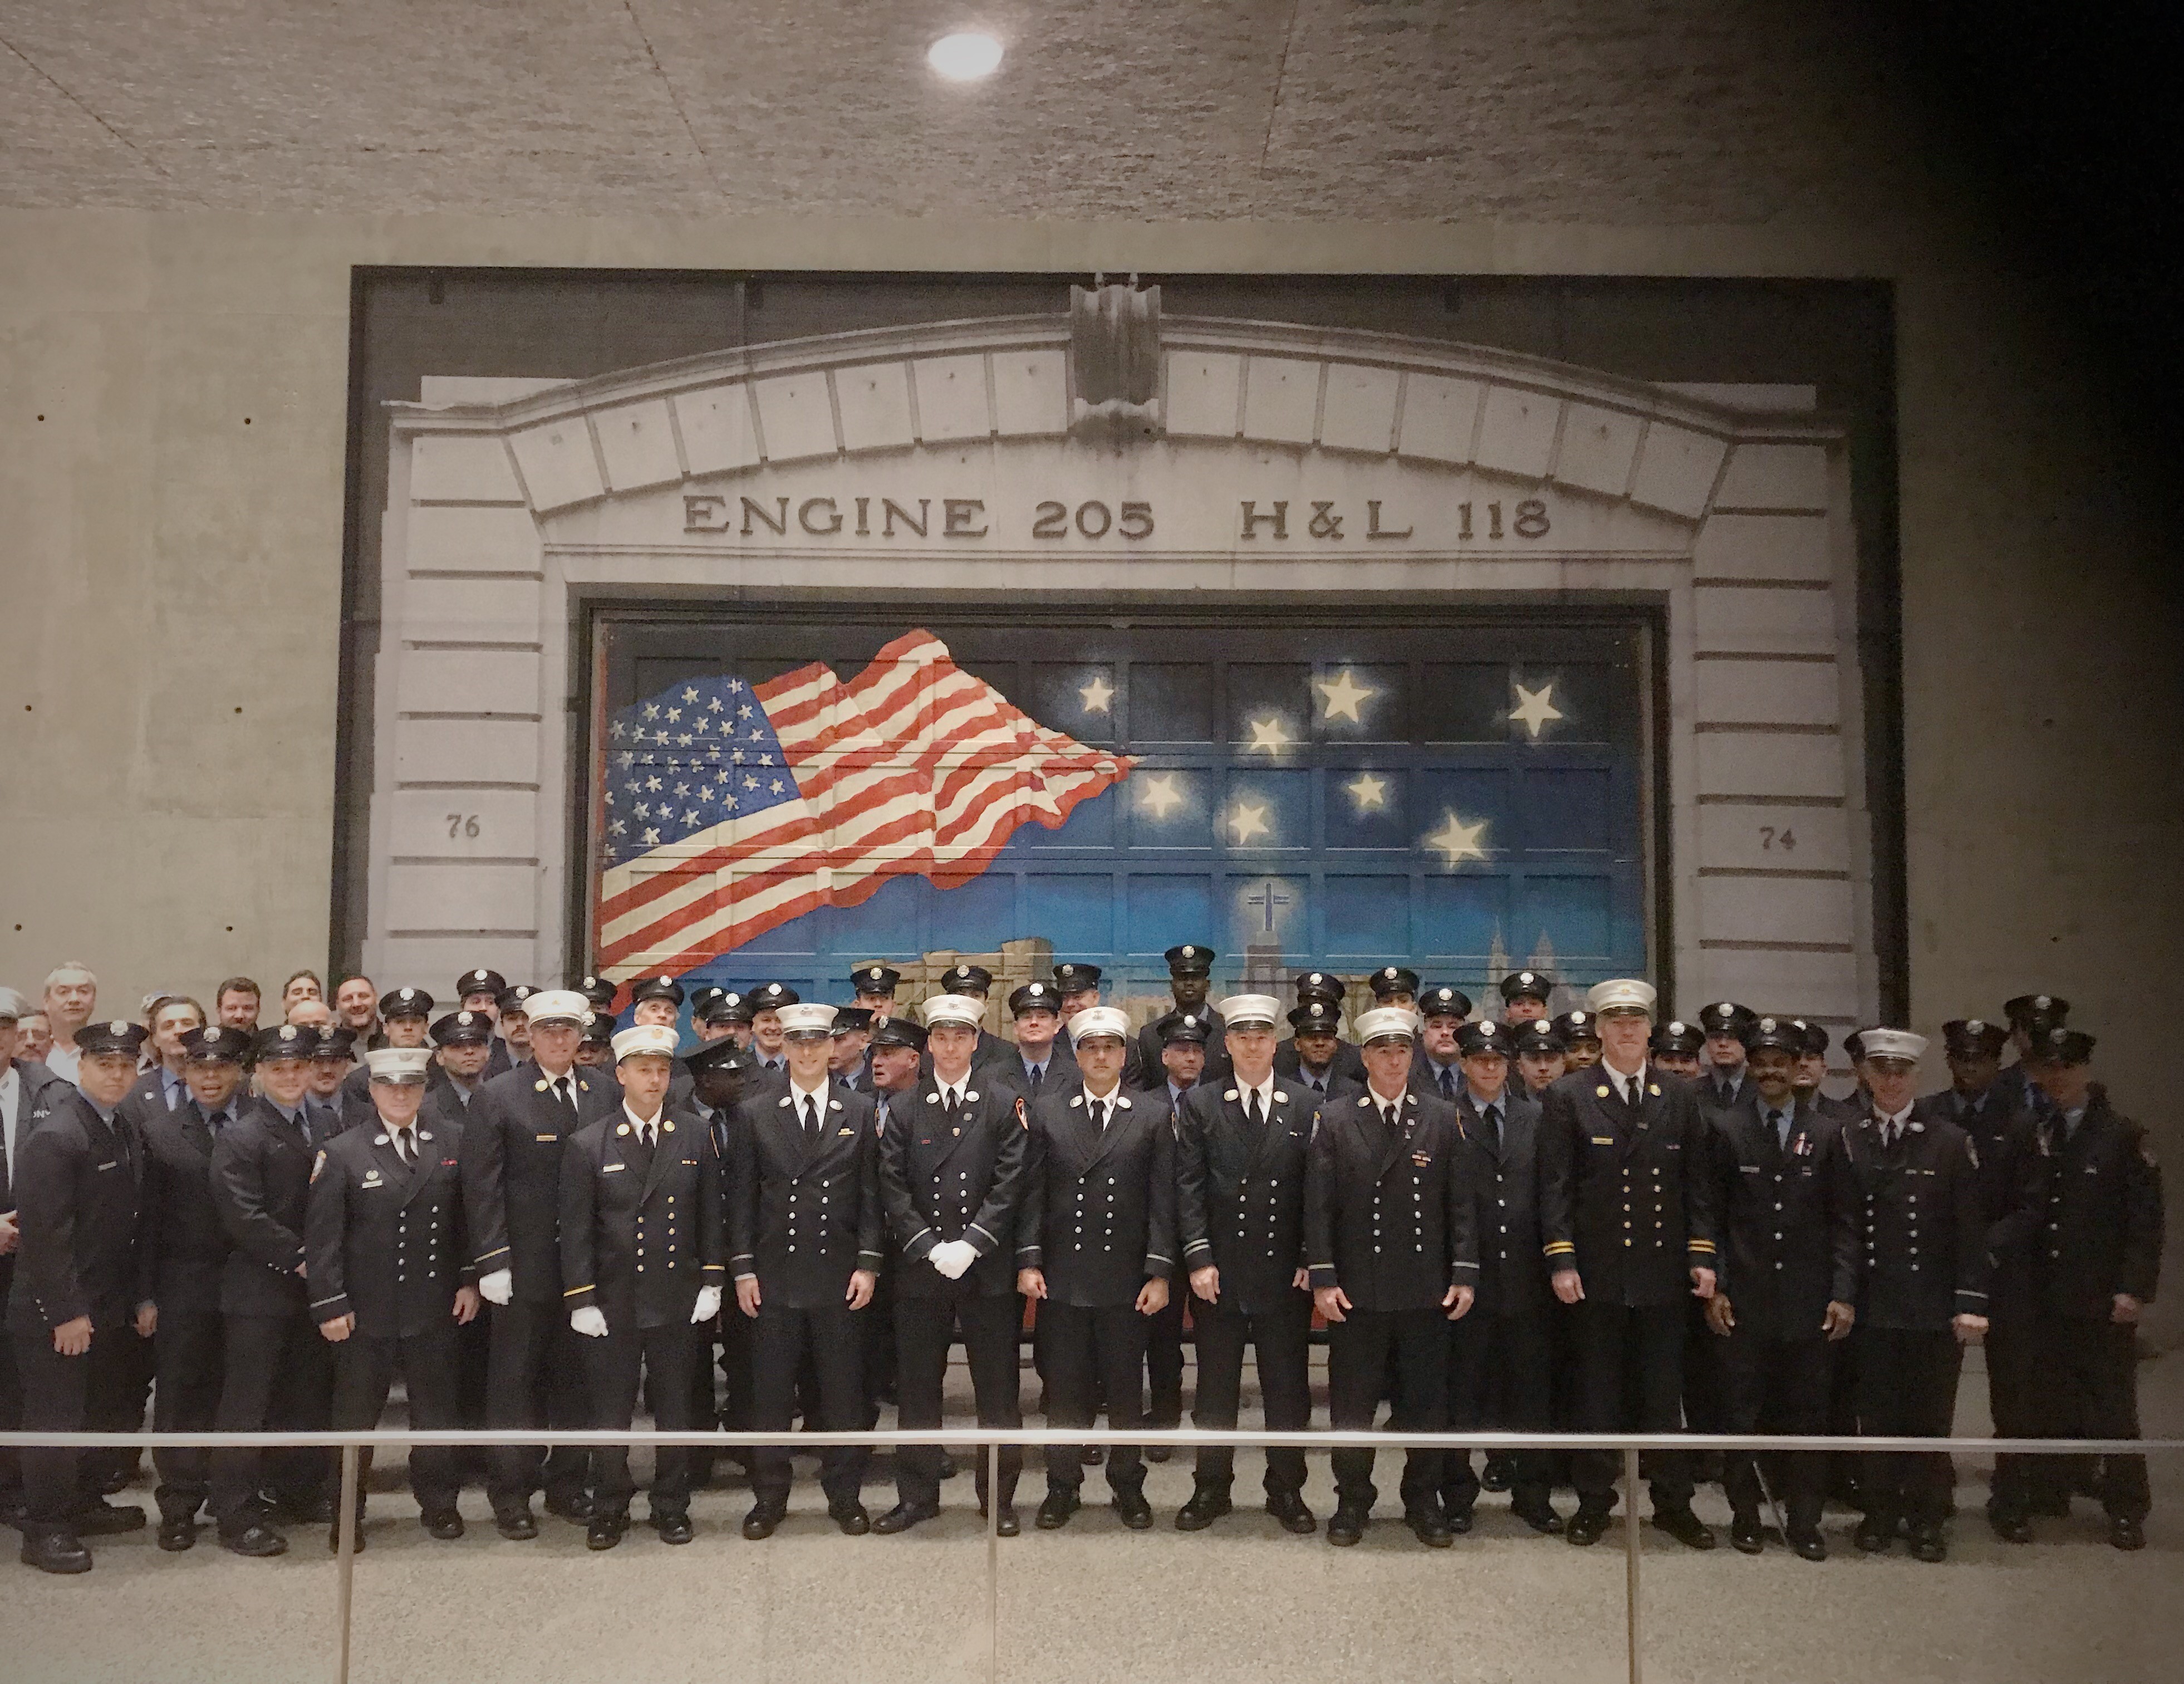 At the Museum’s Tribute Walk, members of FDNY Engine 205 and Ladder 118 stand in front of a firehouse door painted in tribute to their fellow firefighters killed on 9/11. The painting depicts an American flag on a starry night.